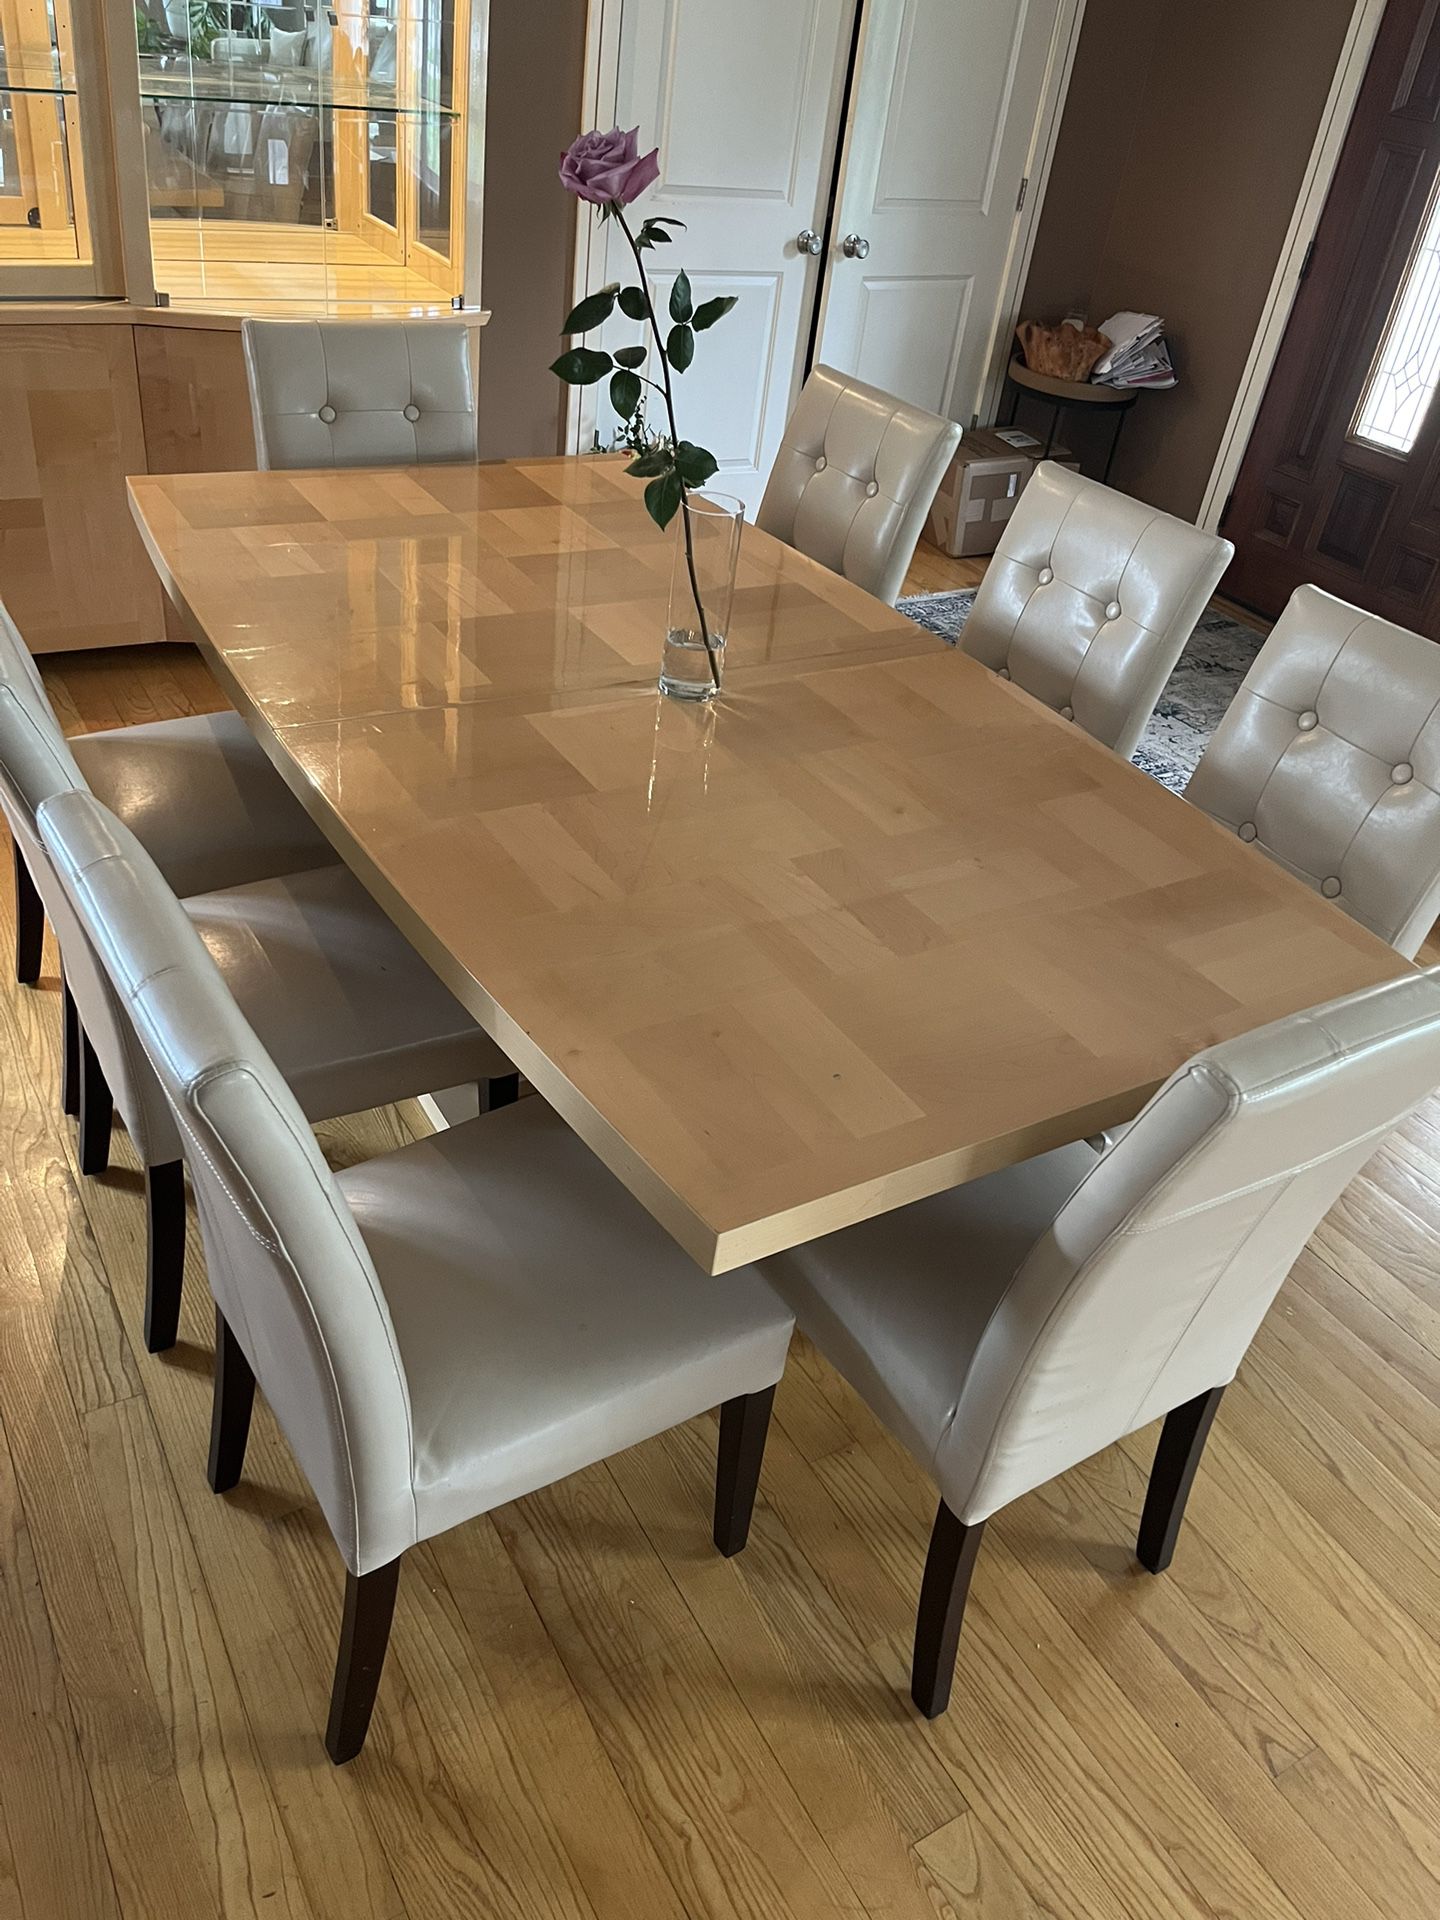 Extendable Dining Room Table, Sits Up To 8-12 People 